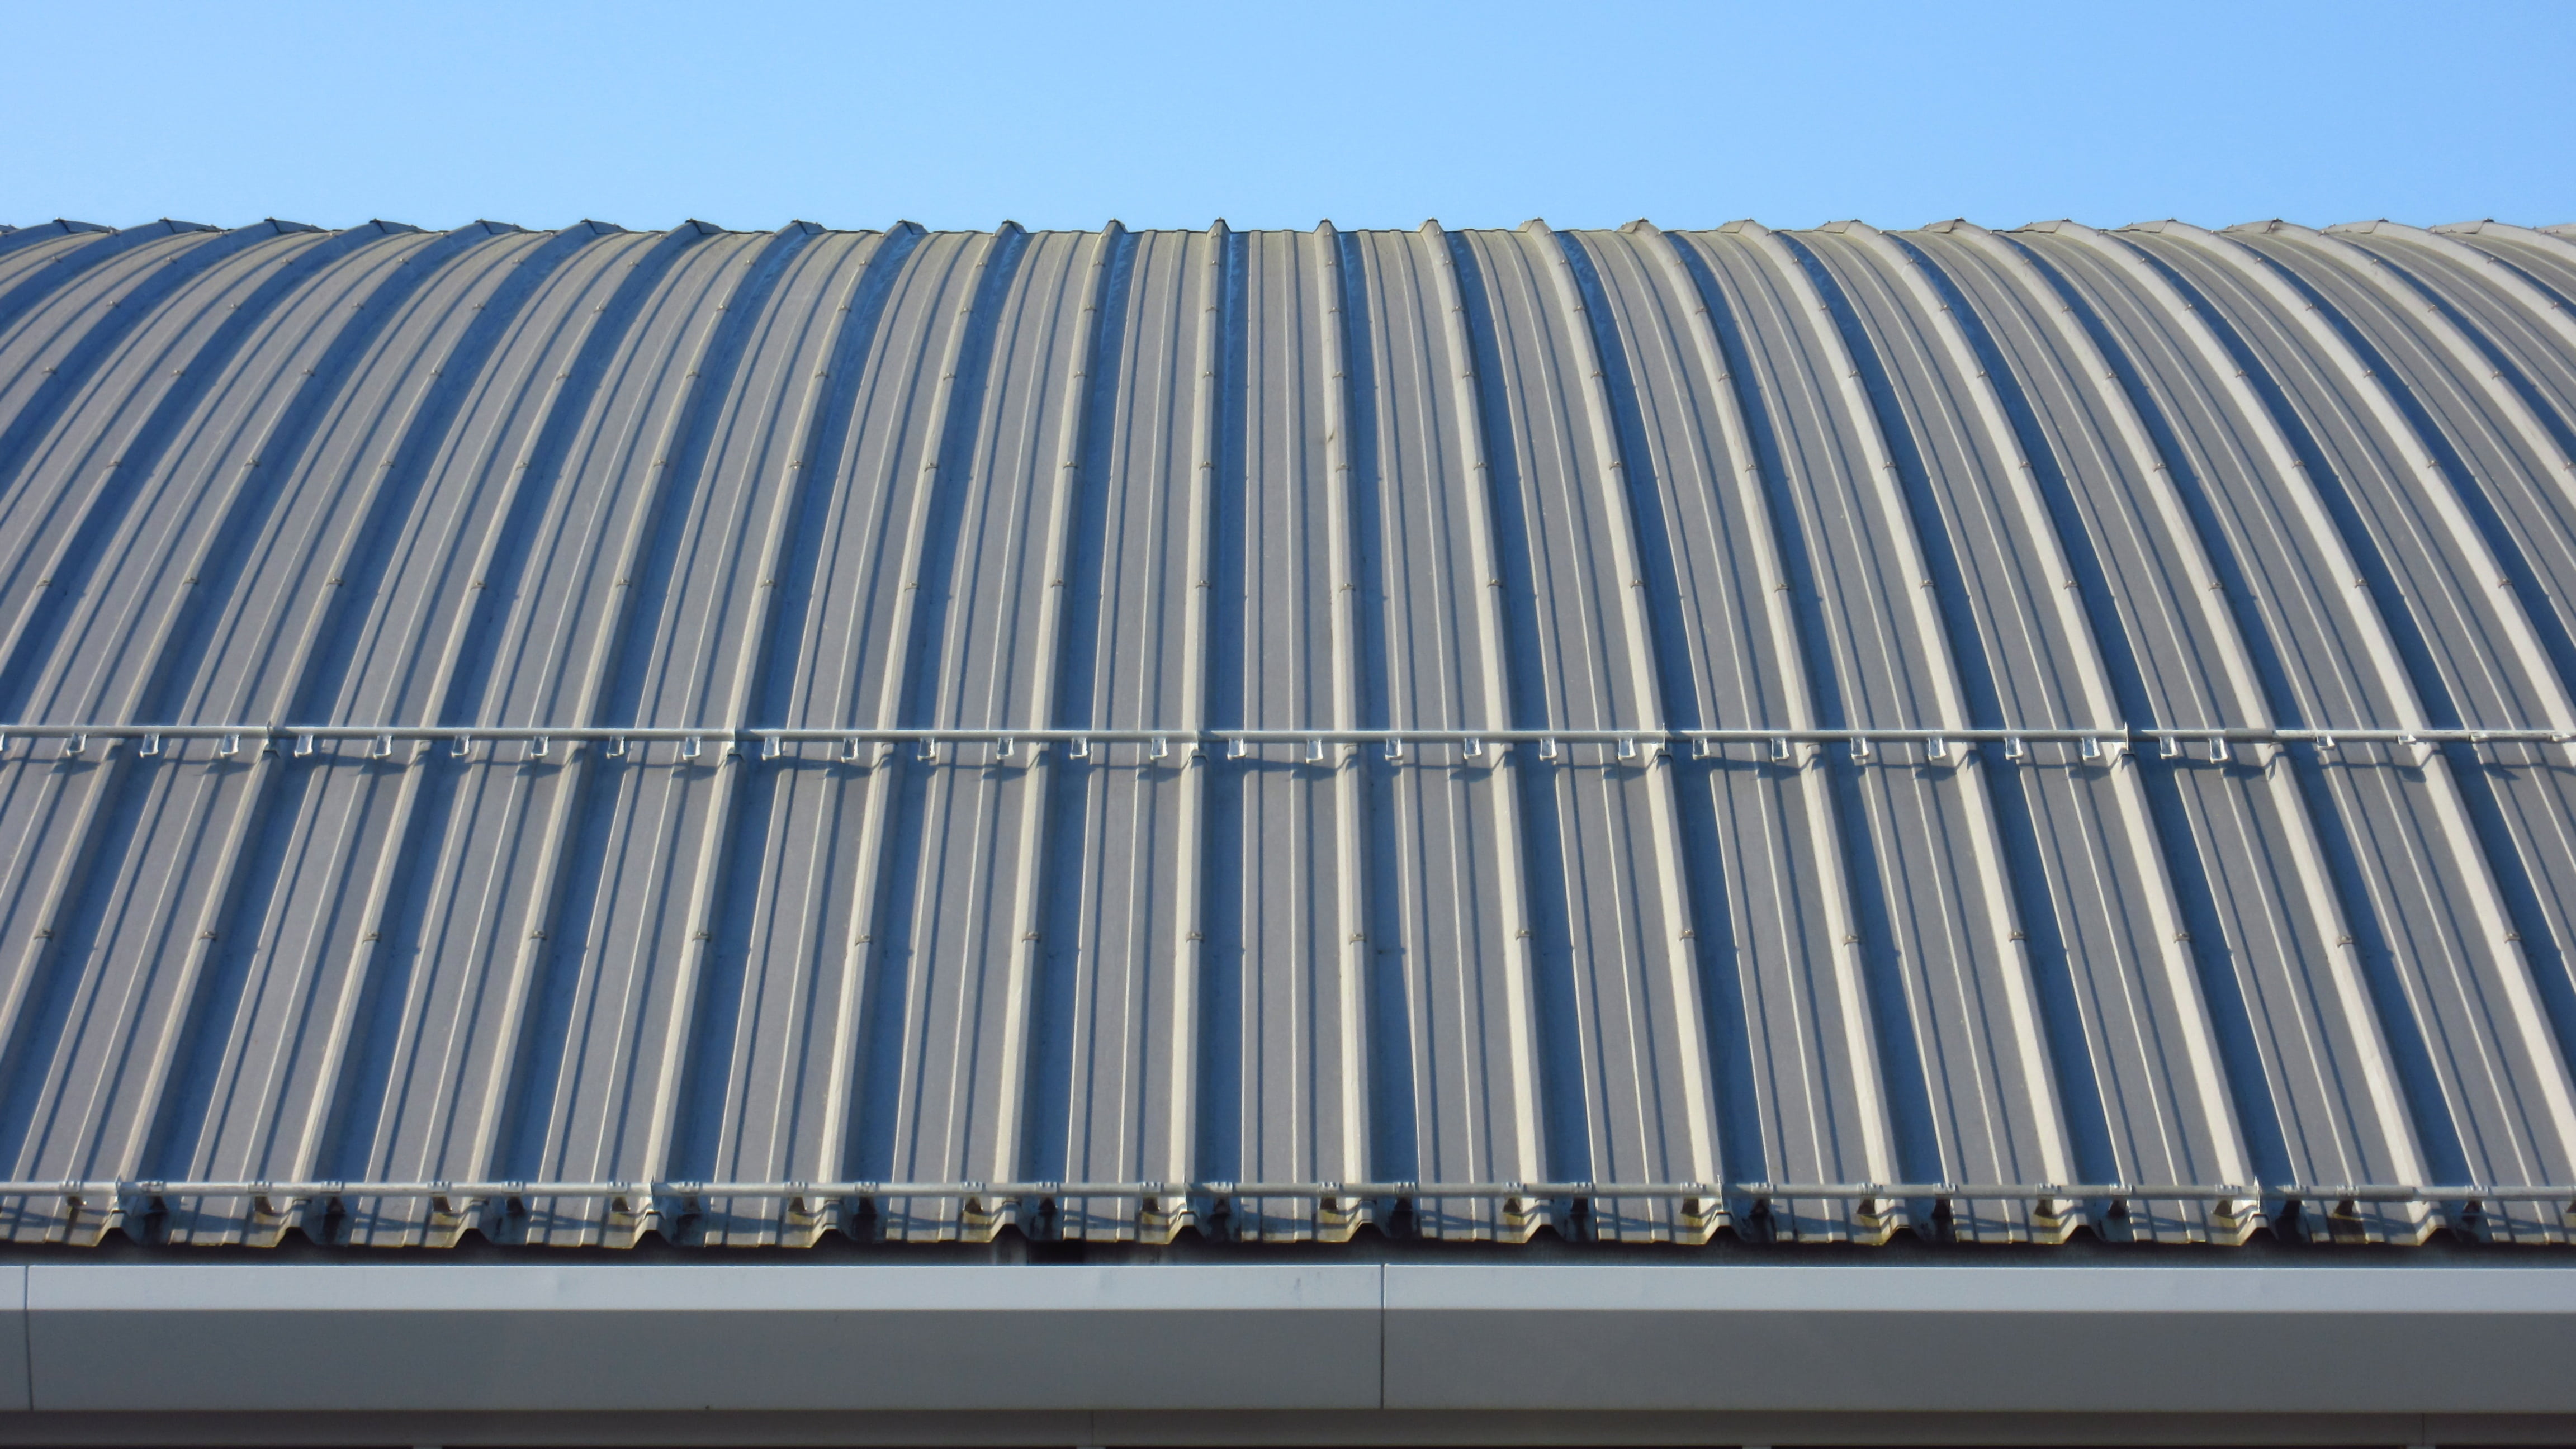 grey galvanized iron, sheet metal roof, rip, architecture, building